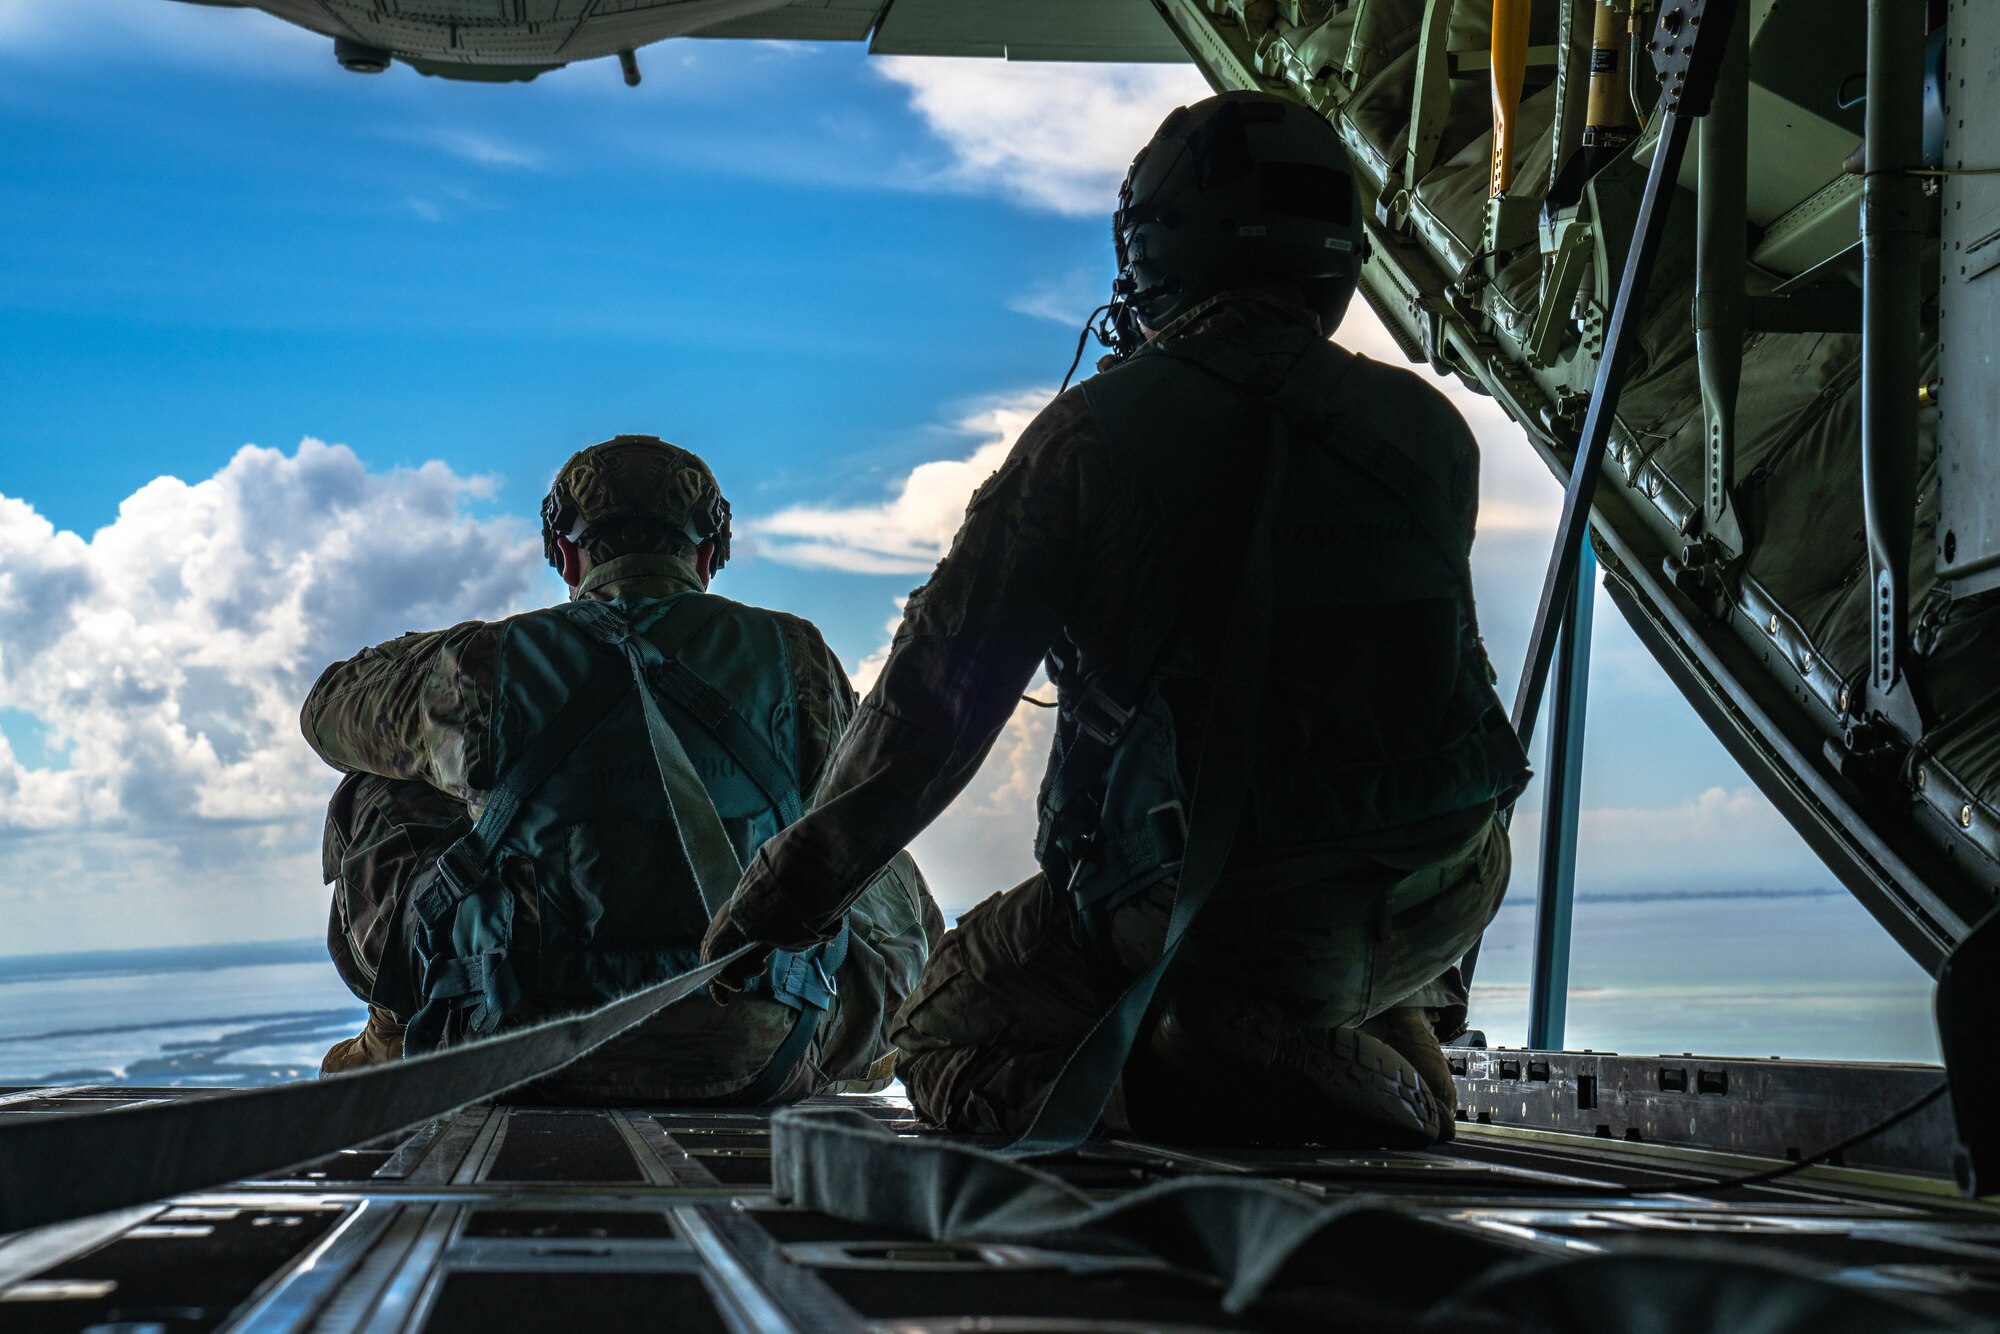 U.S. Air Force Senior Airman Cameron Stewart, left, Air Force Special Operations Command administrator, sits on the loading ramp of an HC-130J Combat King II aircraft assigned to the 920th Rescue Wing, Patrick Space Force Base, Florida, over Tampa, Florida, Sept. 1, 2022.